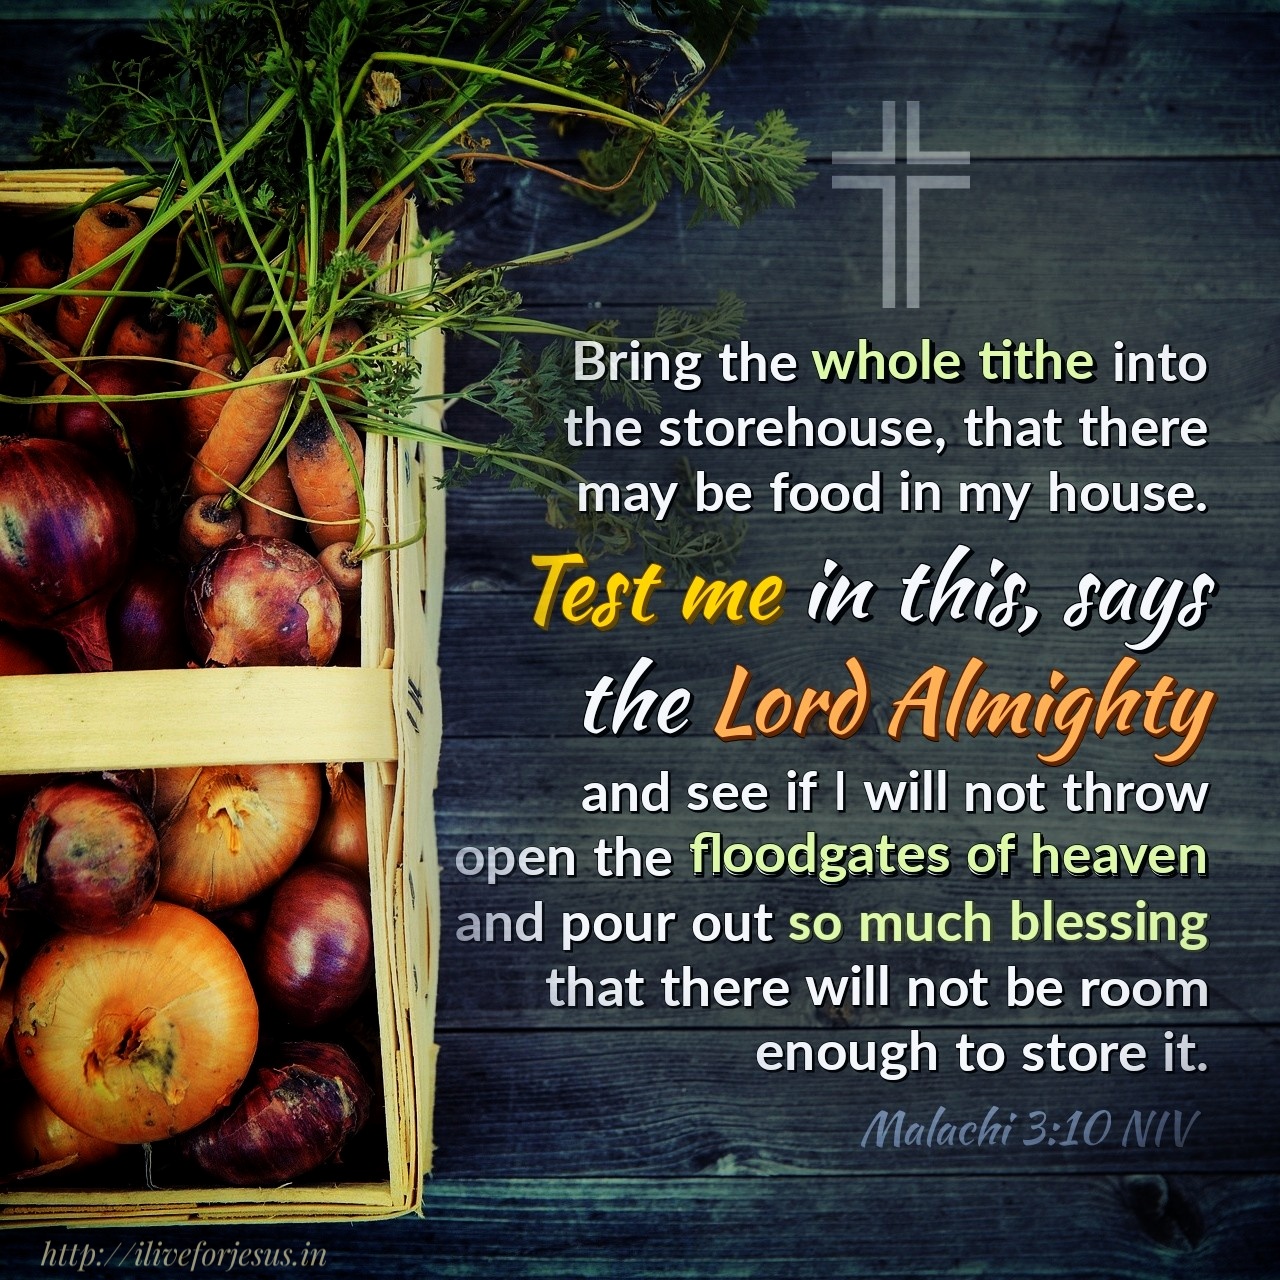 Bring the whole tithe into the storehouse, that there may be food in my house. Test me in this, says the Lord Almighty, and see if I will not throw open the floodgates of heaven and pour out so much blessing that there will not be room enough to store it. Malachi 3:10 NIV